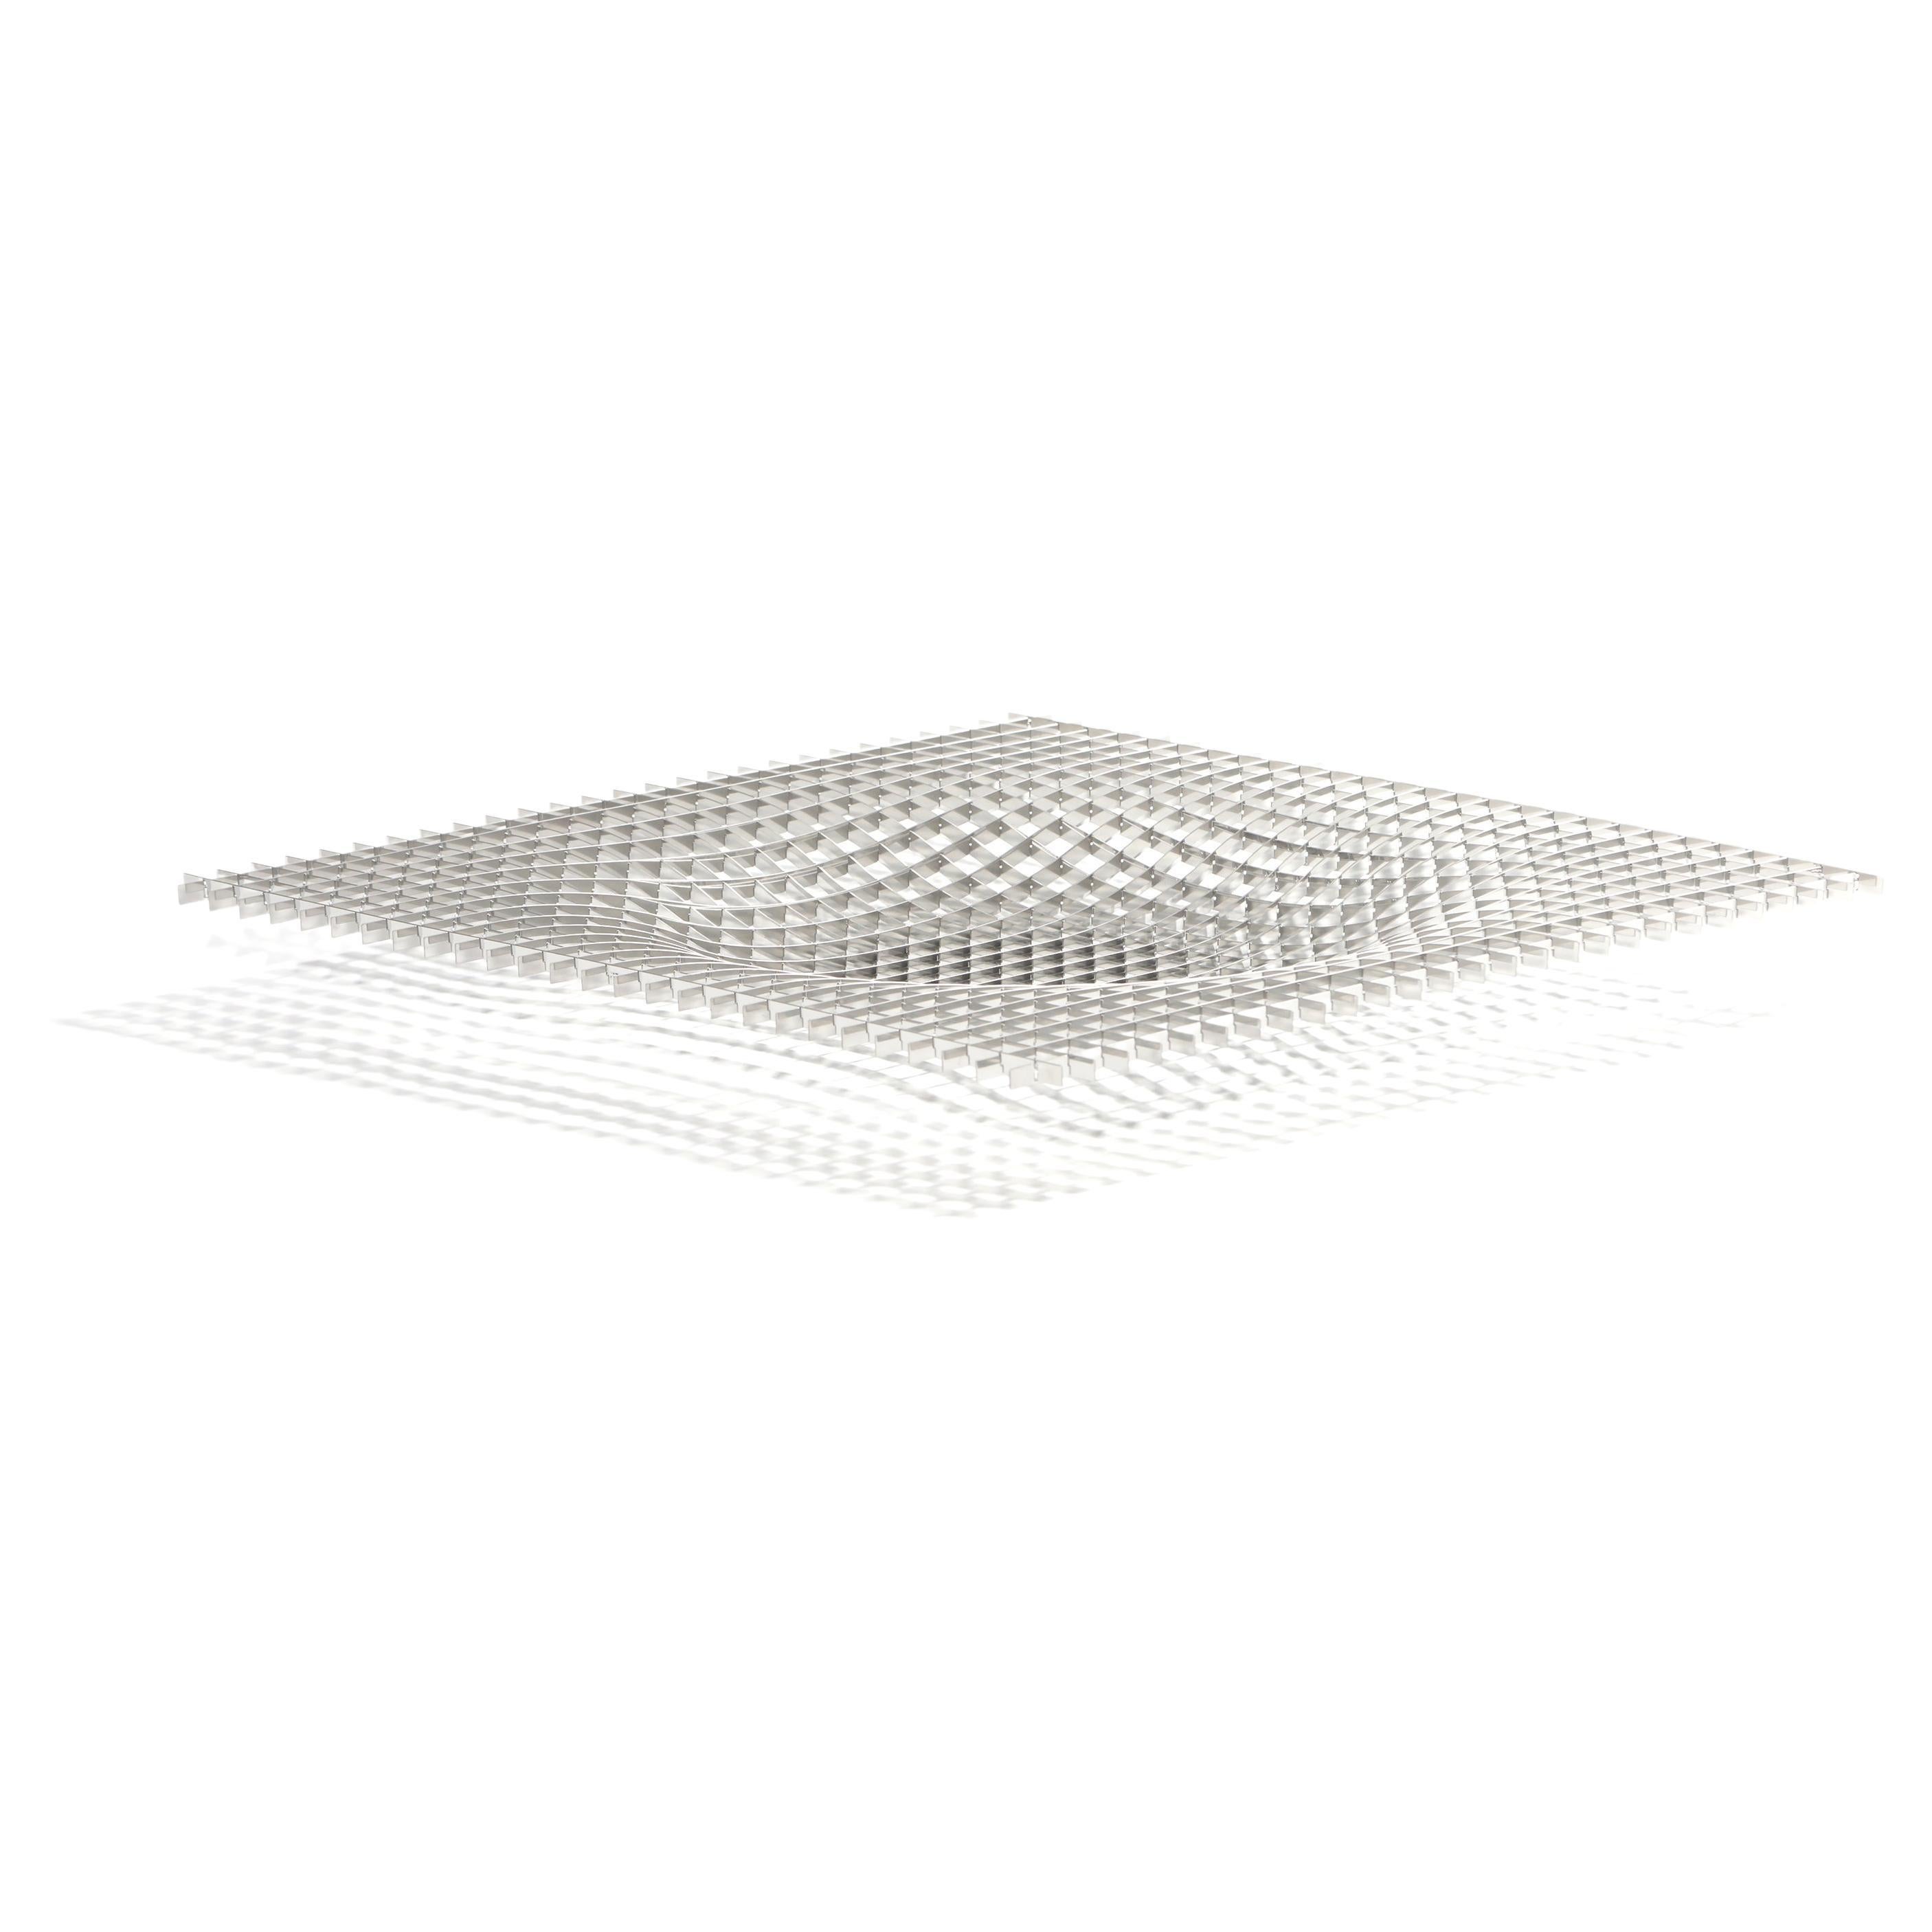 GRAVITY: Contemporary shiny stainless steel large centrepiece 